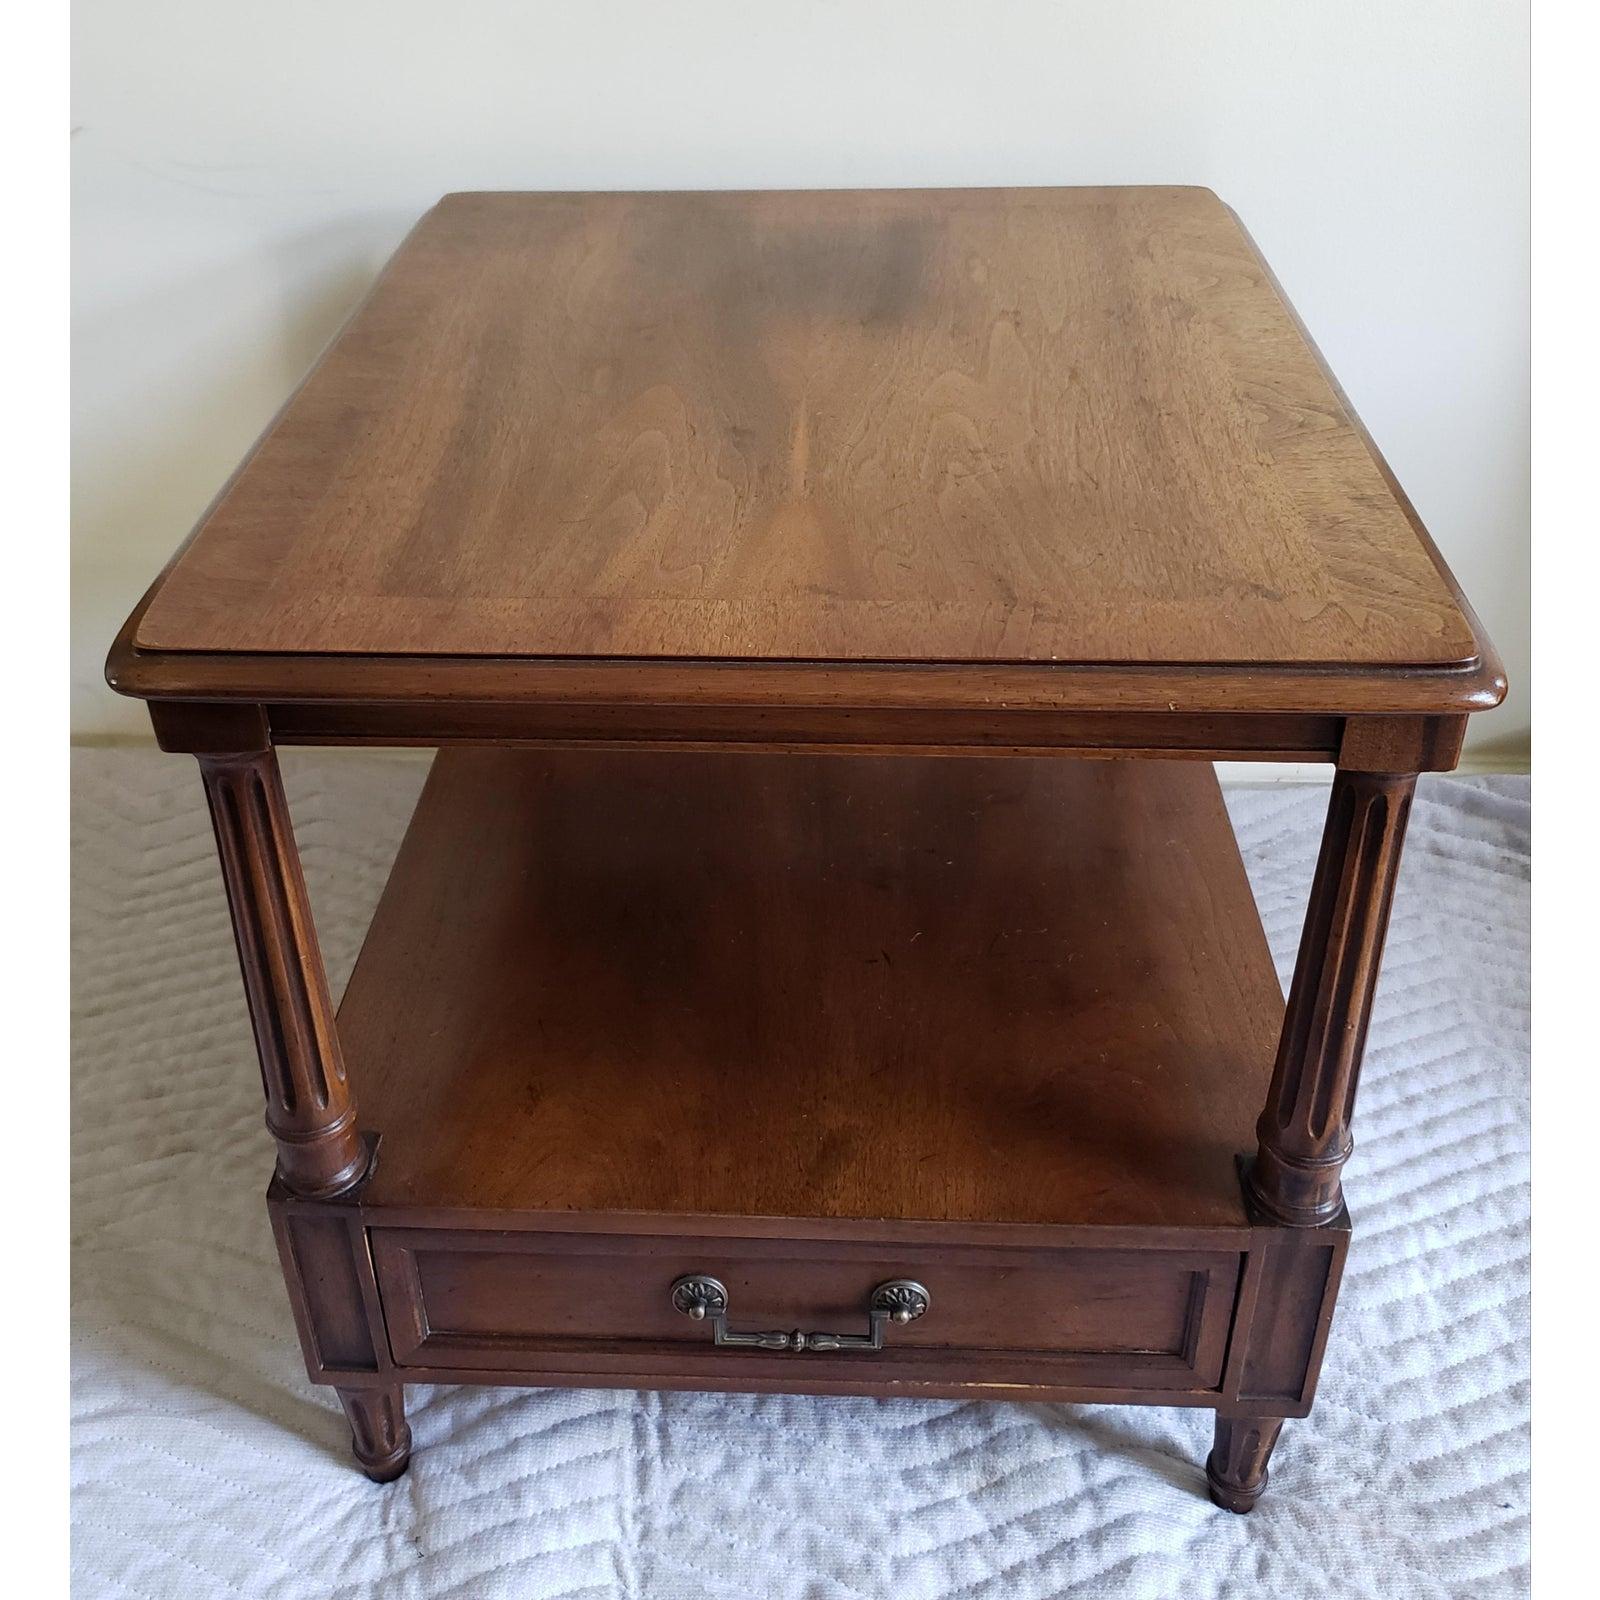 Henredon solid walnut side table with one bottom drawer. Original Hardware. Excellent Condition with some signs of use. Measures 22